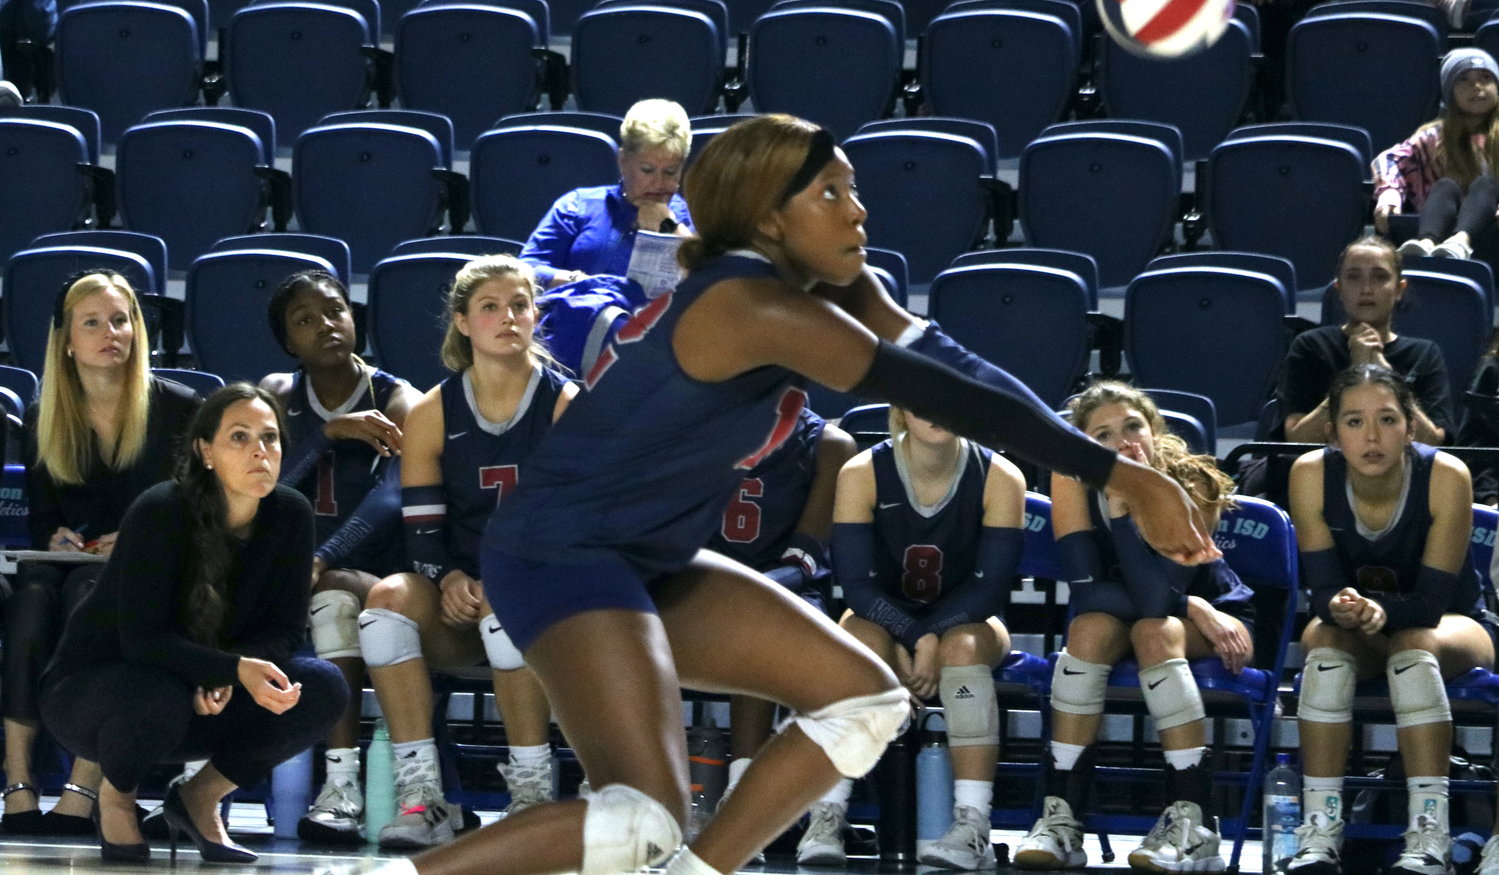 Cindy Tchouangwa digs a ball during Saturday’s Class 6A-Region III Final against Cinco Ranch at Delmar Fieldhouse.